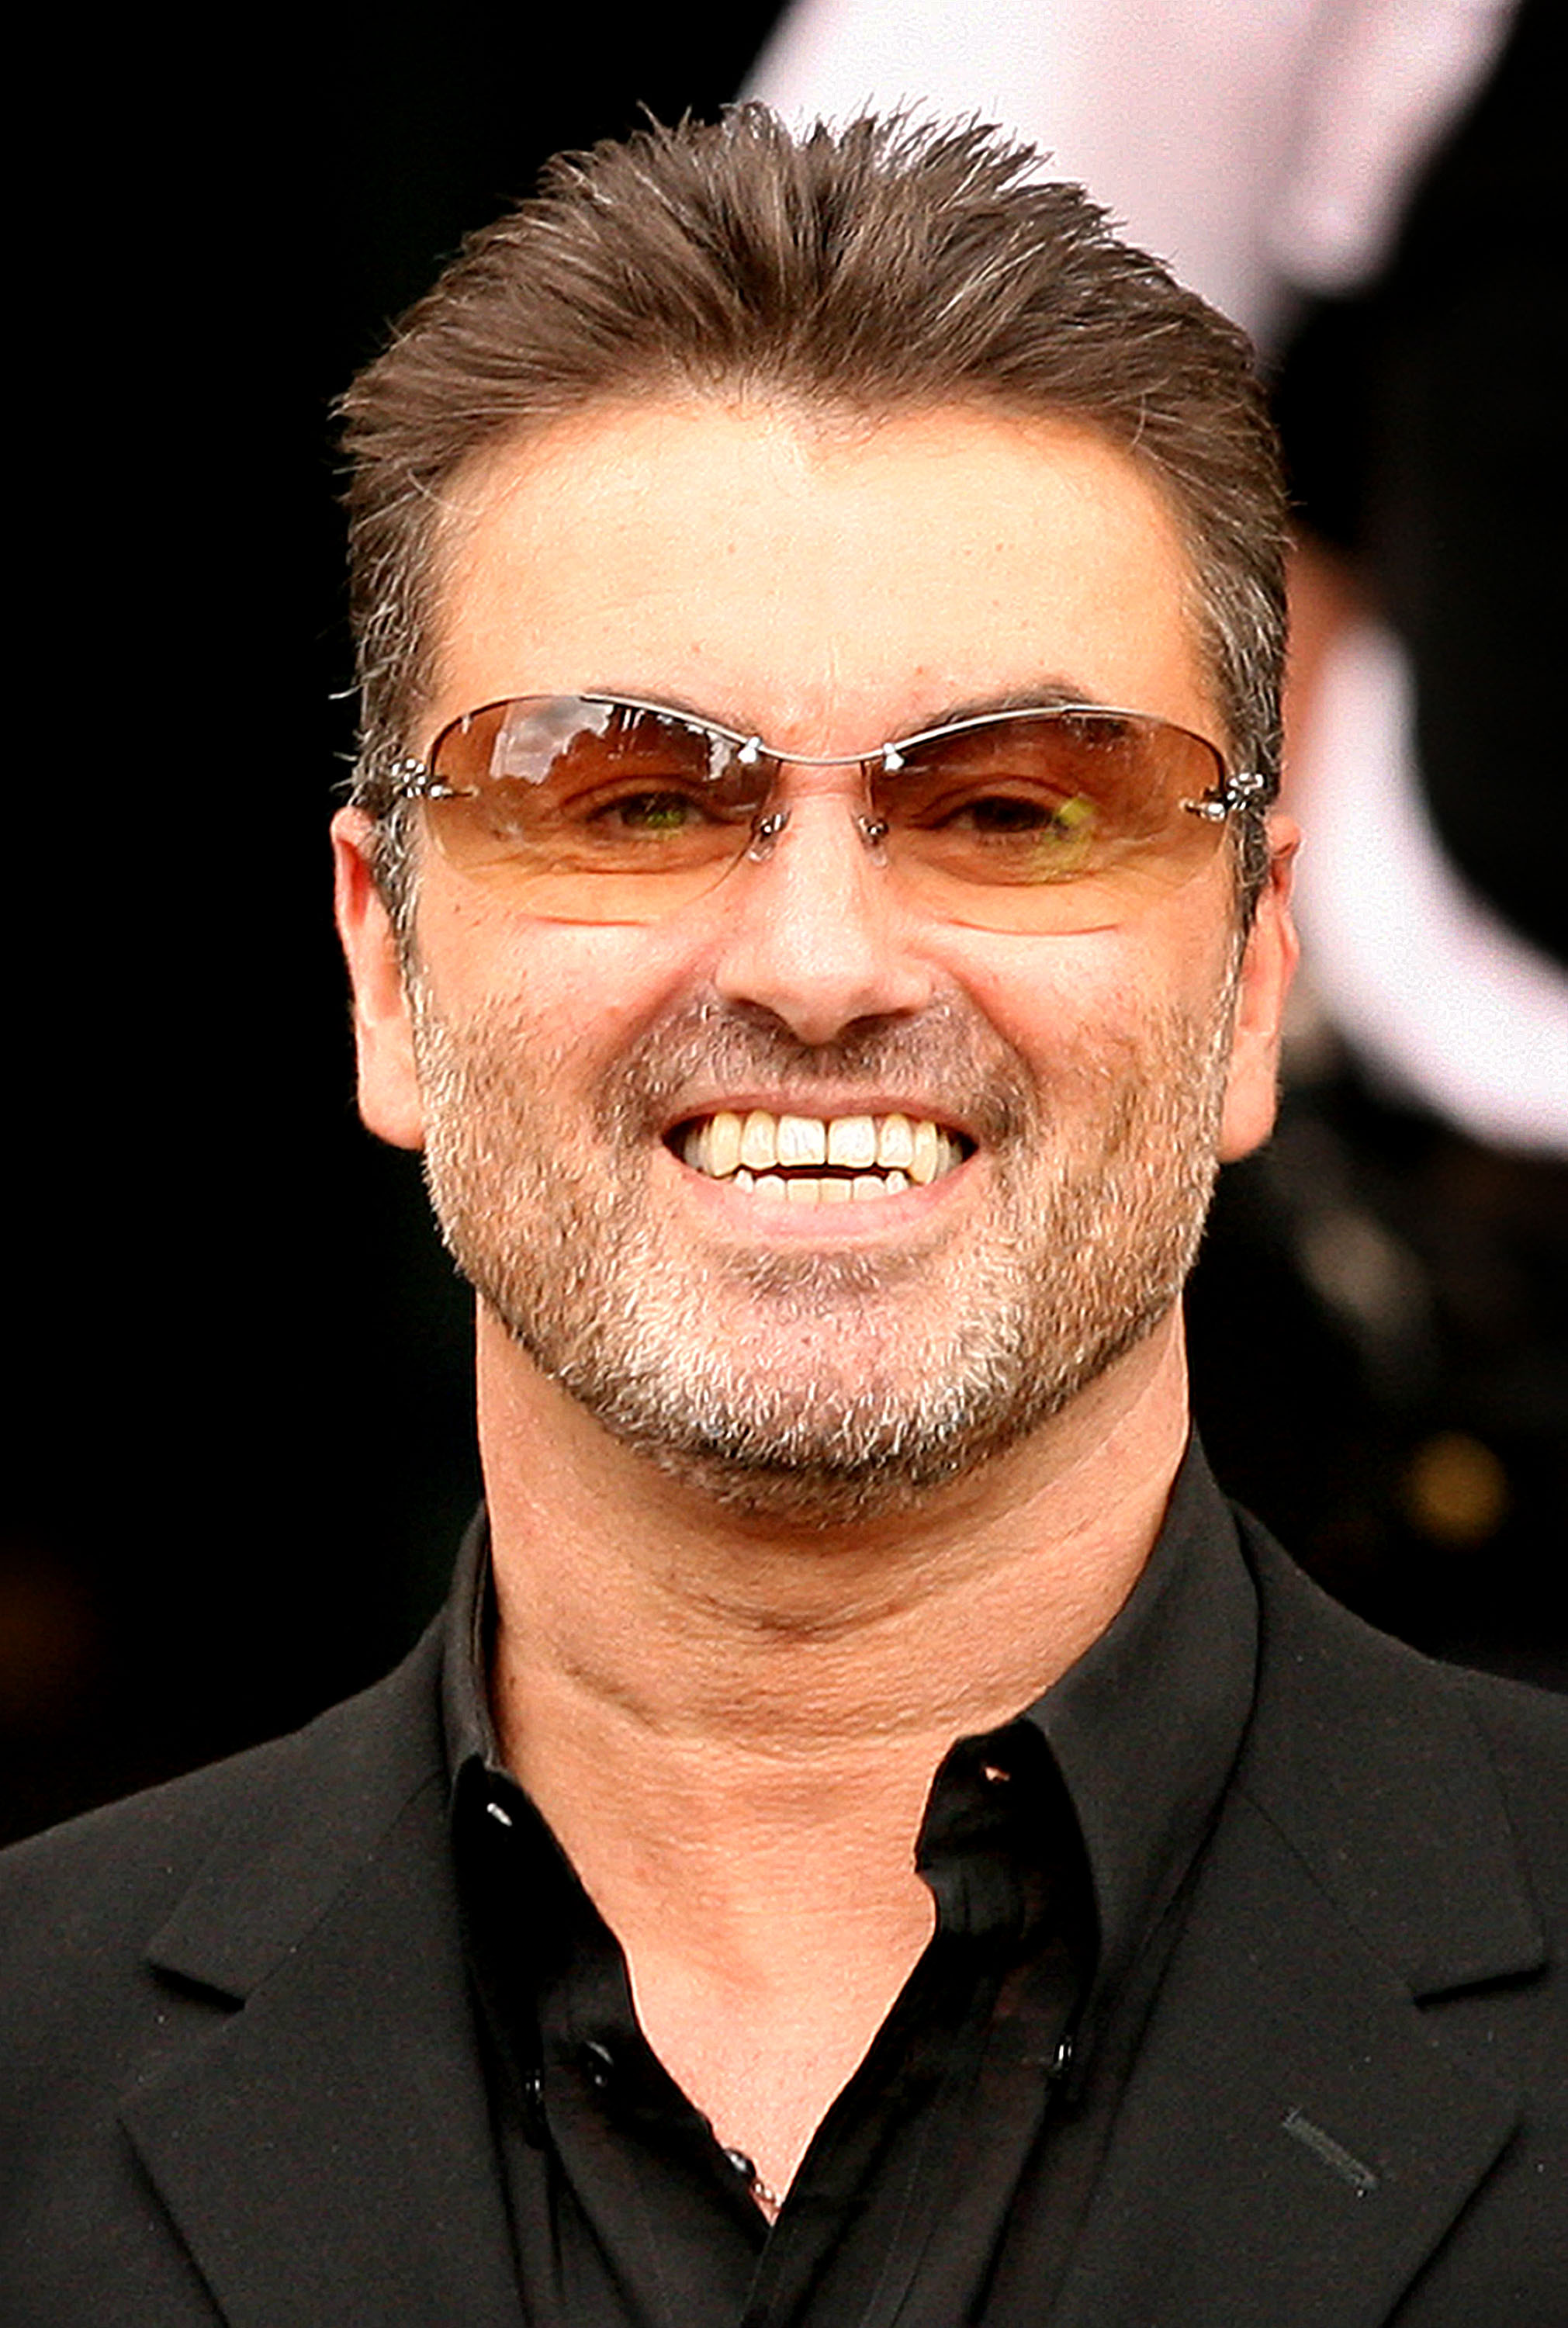 George Michael, who died on Christmas Day 2016 aged just 53, bought the Hampstead property in 1987 and lived in it for years